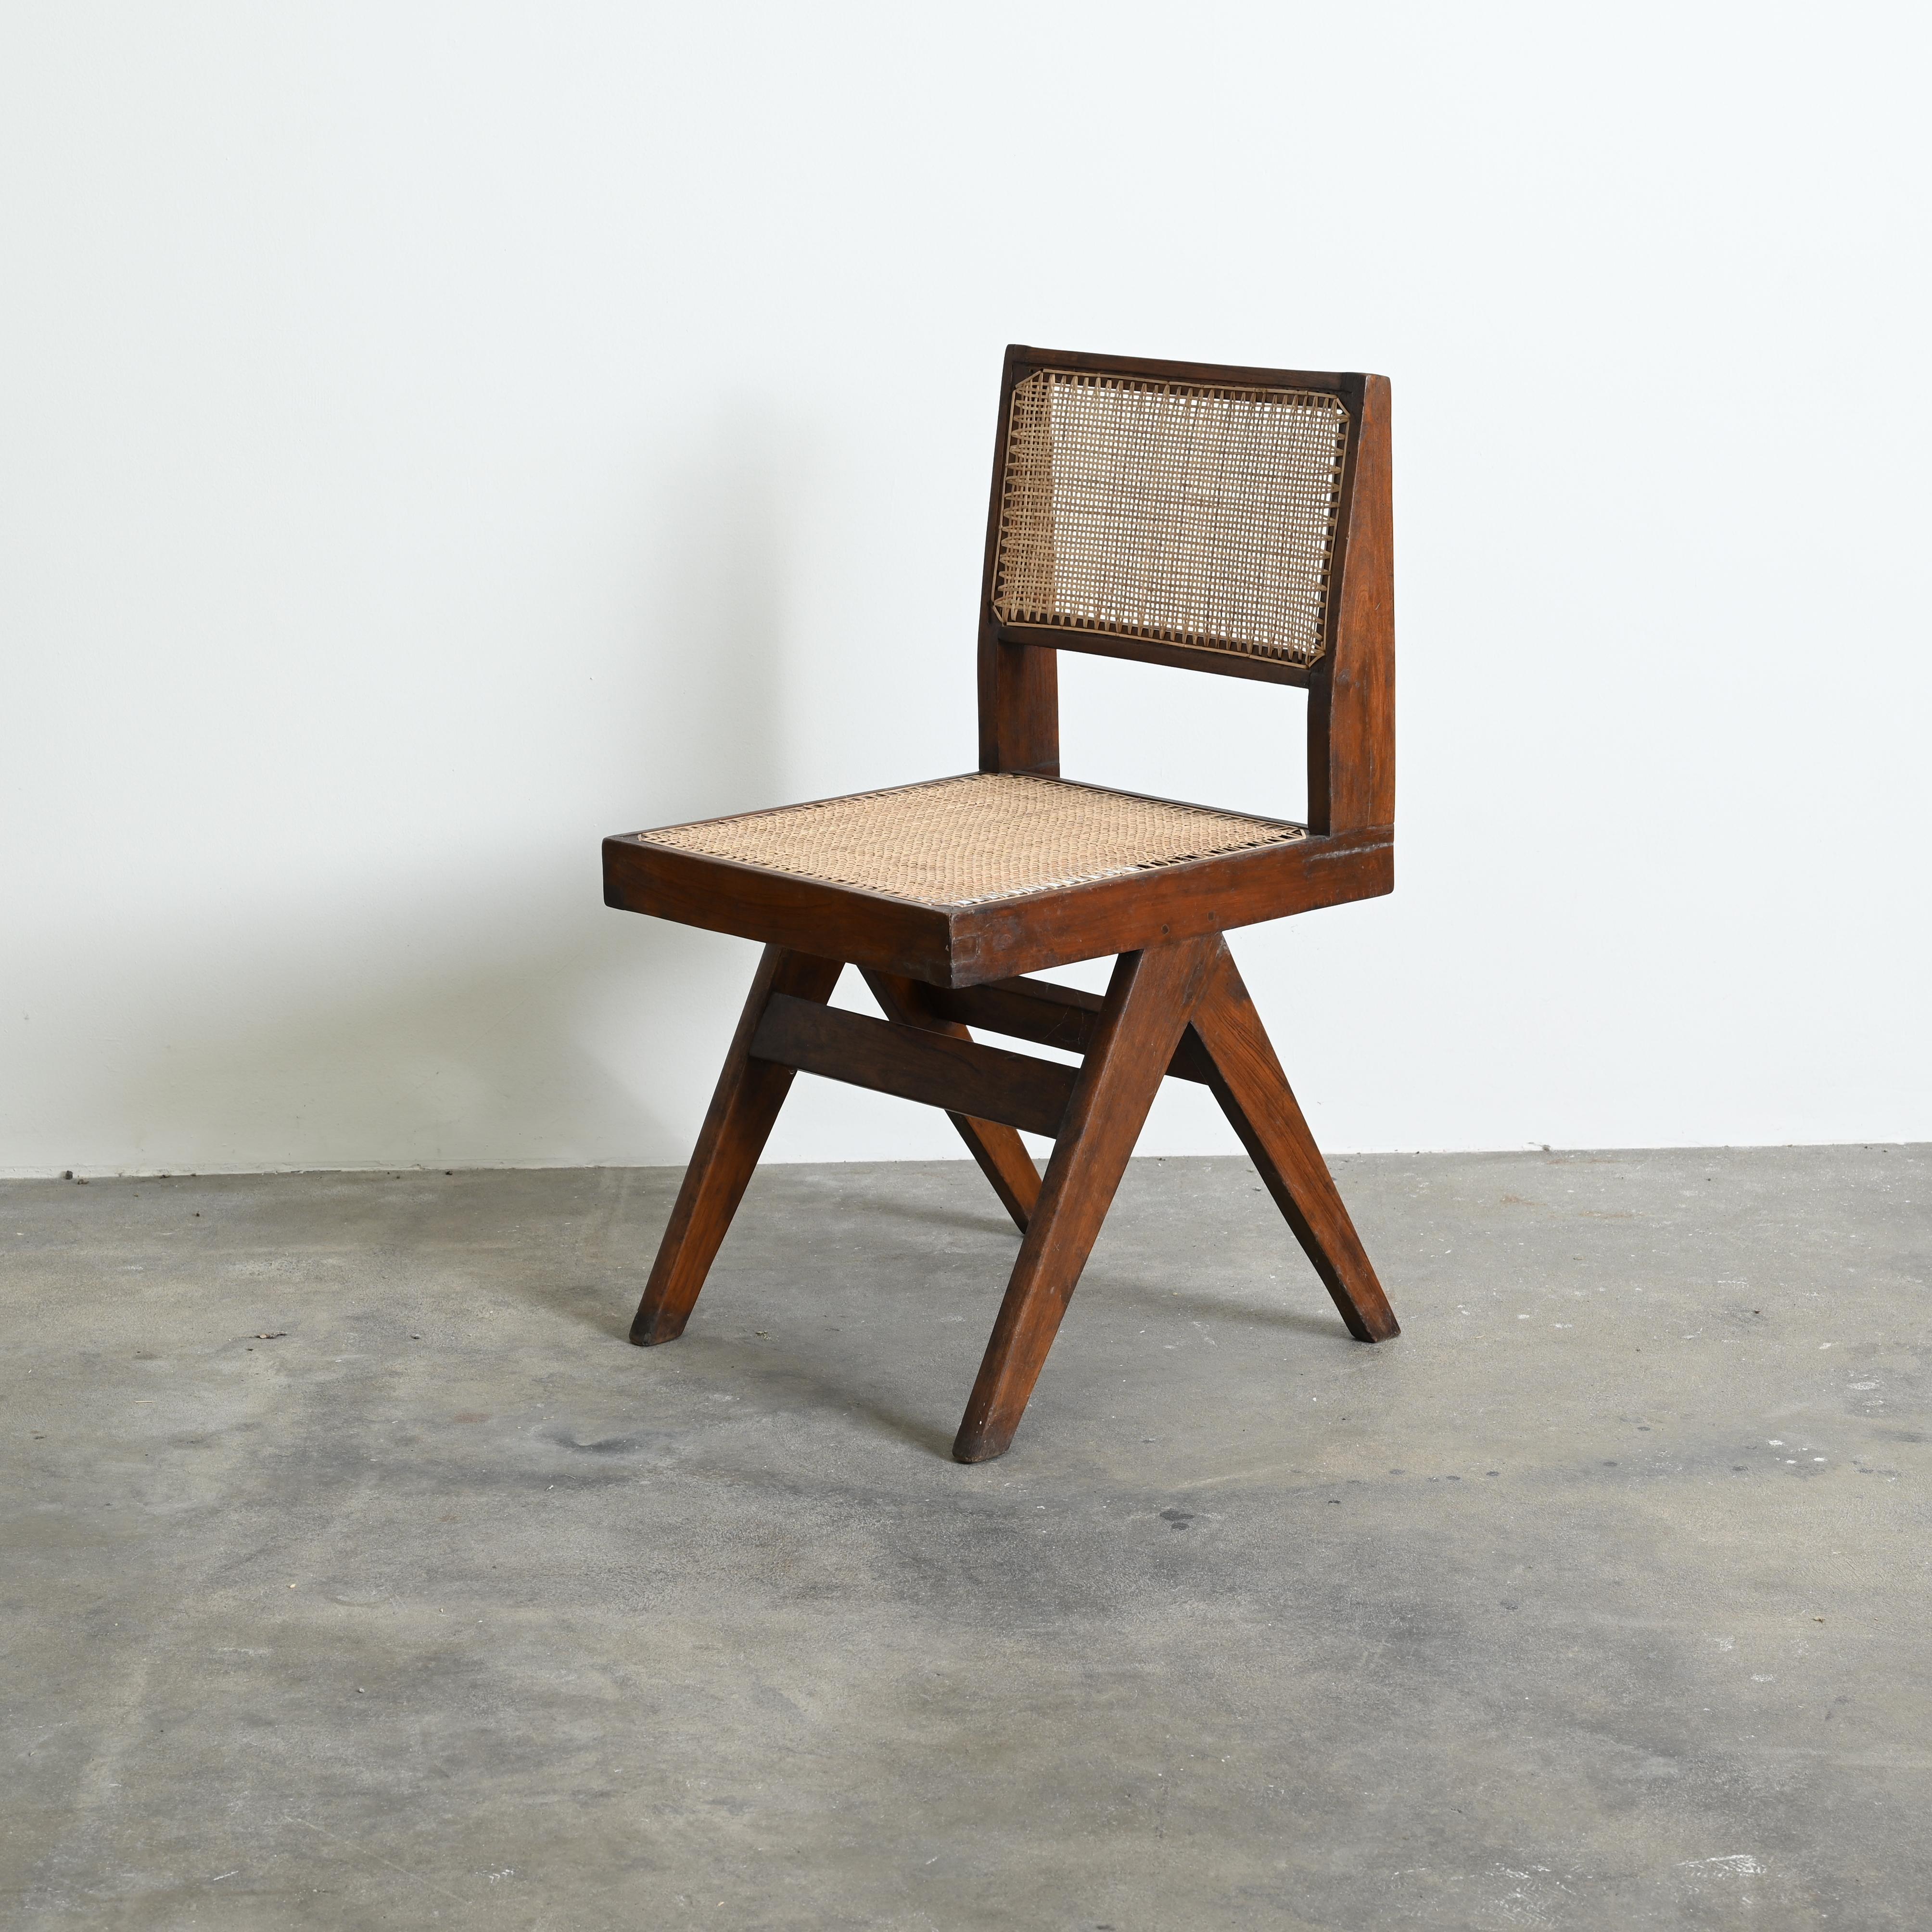 Pierre Jeanneret Pj-SI-25-A Chair / Authentic Mid-Century Modern Chandigarh In Good Condition For Sale In Zürich, CH